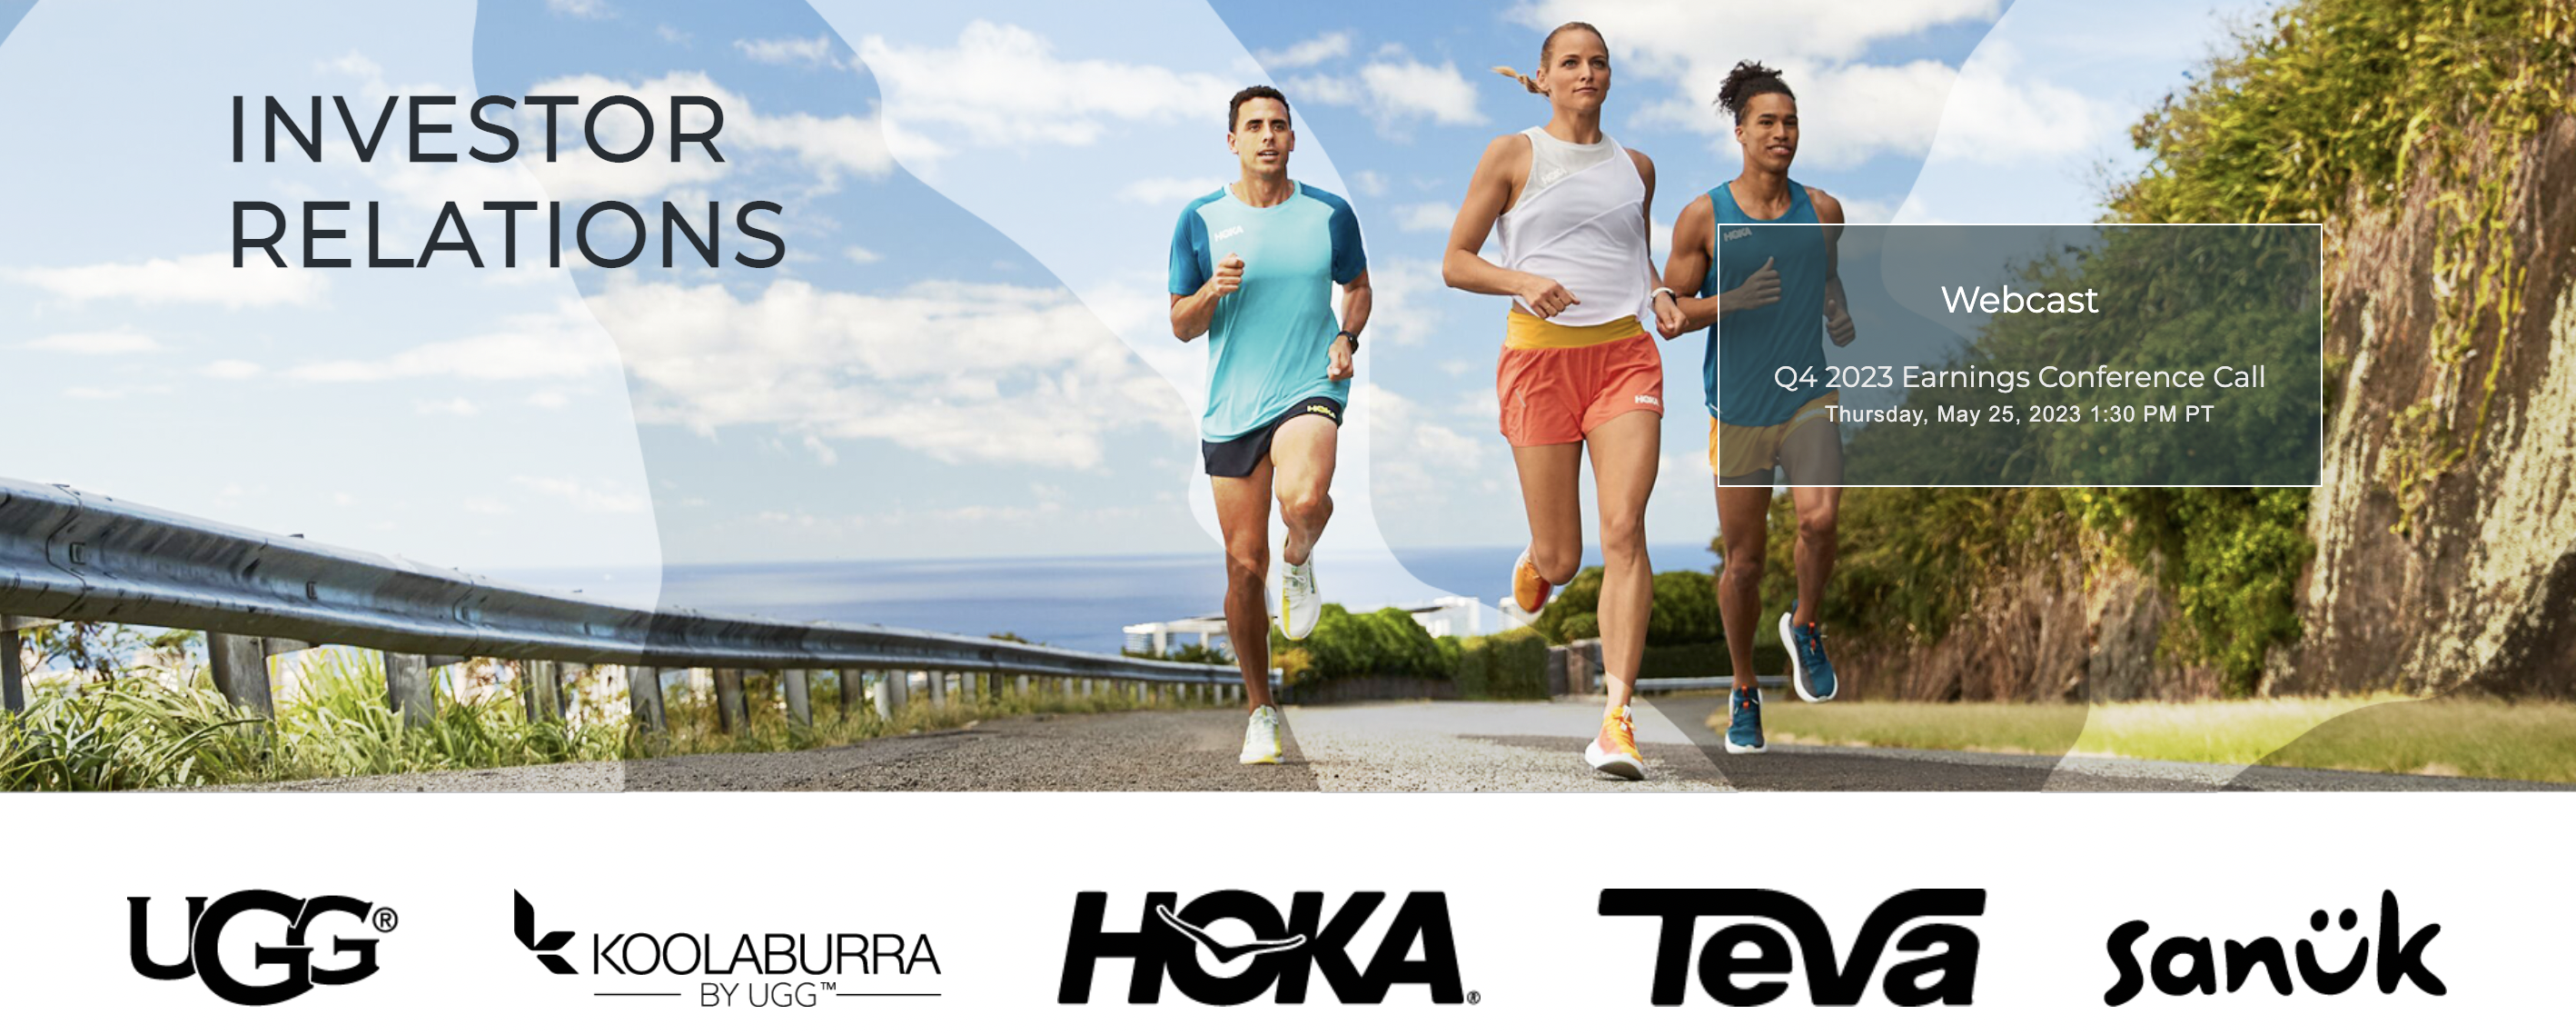 Hoka One One Drives Deckers Group to Record High FY Performance With Fourth Consecutive Revenue Growth of More Than 50%